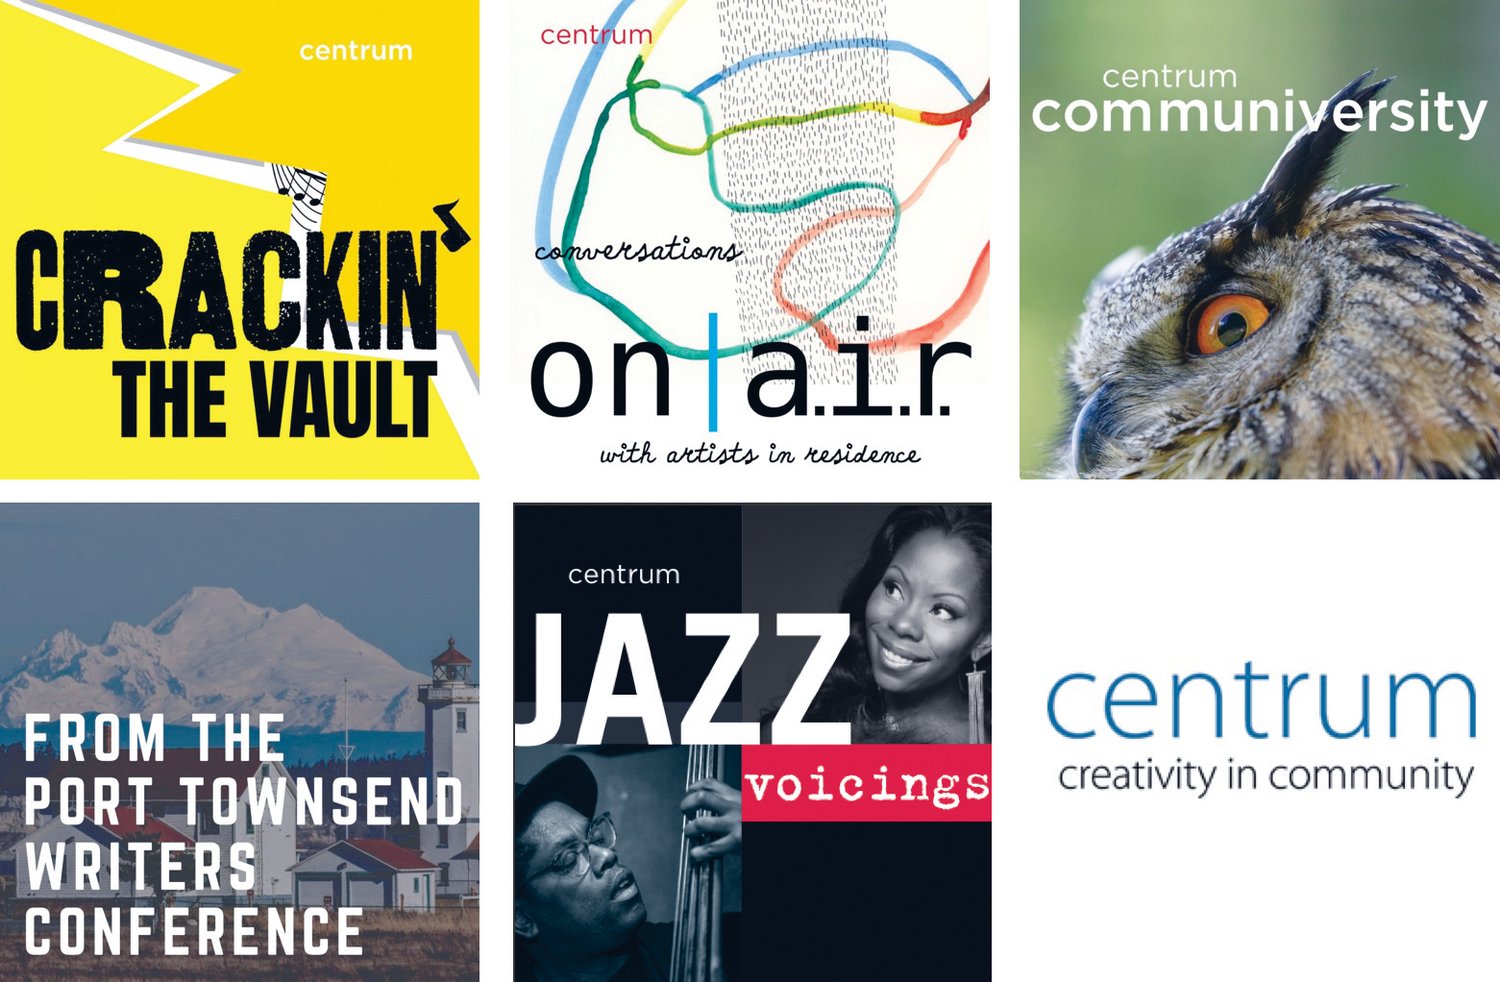 Centrum is launching a new podcast series highlighting art and the artistic process through the lenses of music, writing, visual arts, and general conversations.